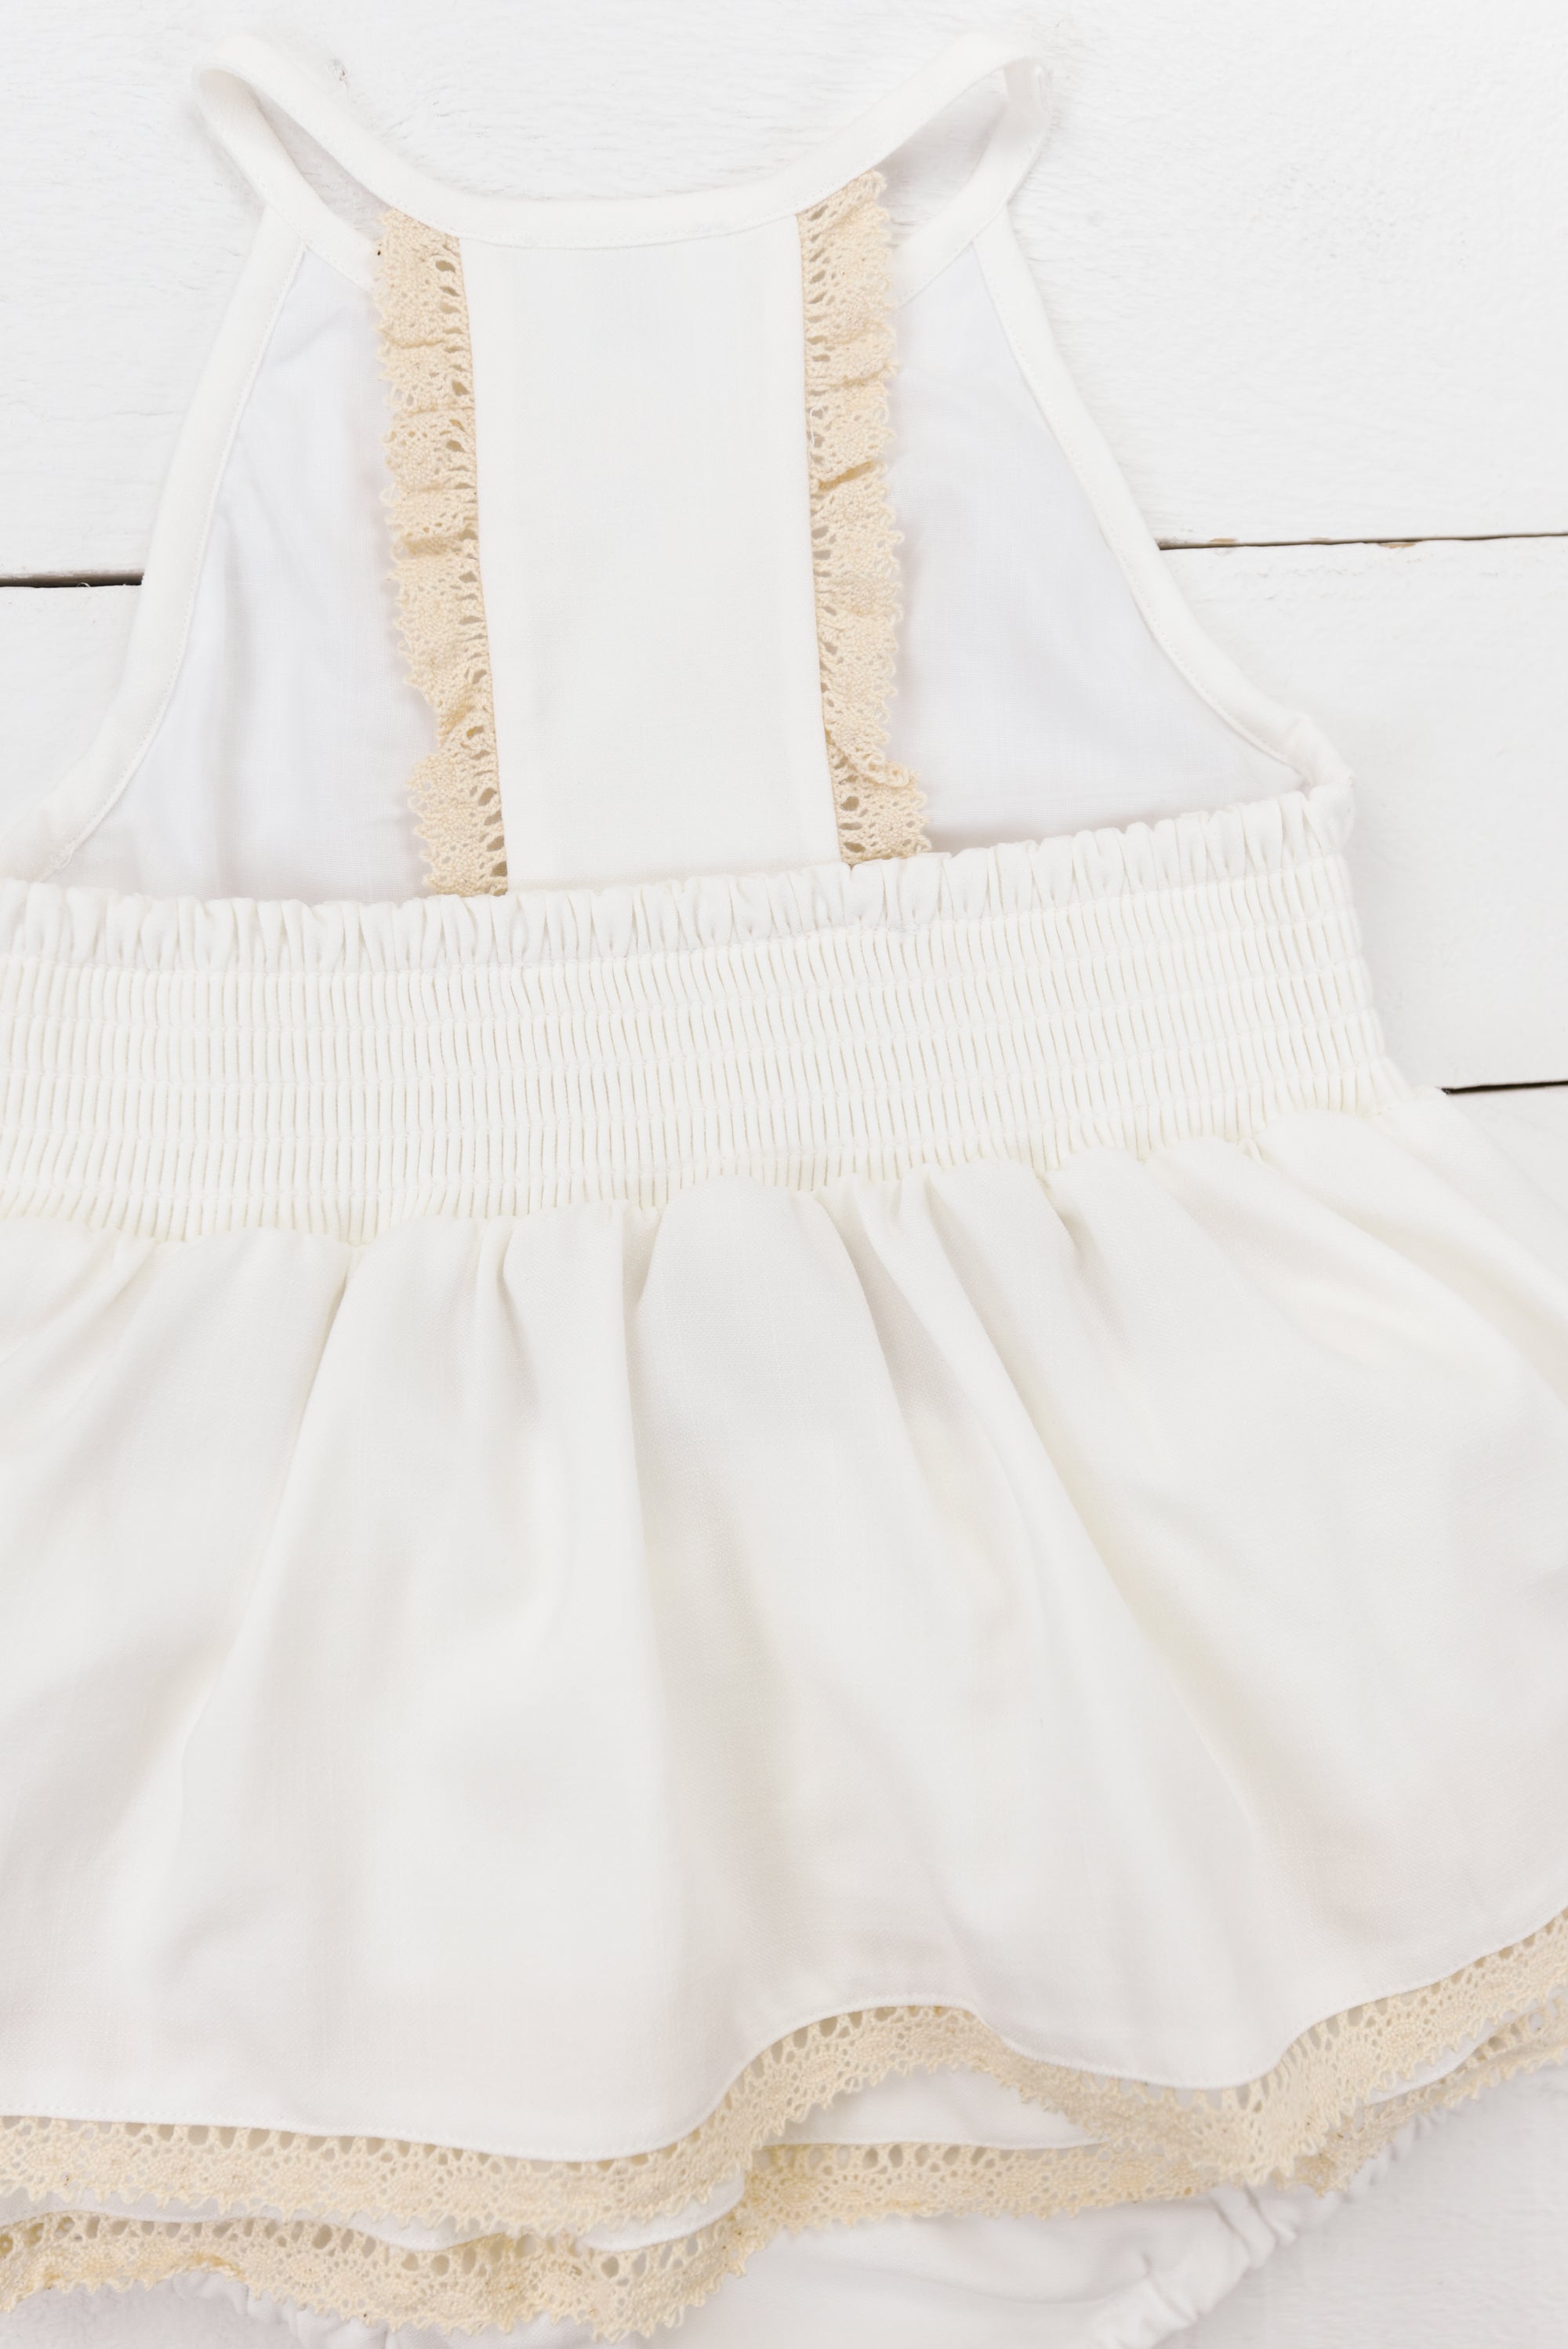 a baby girl's white dress on a wooden floor